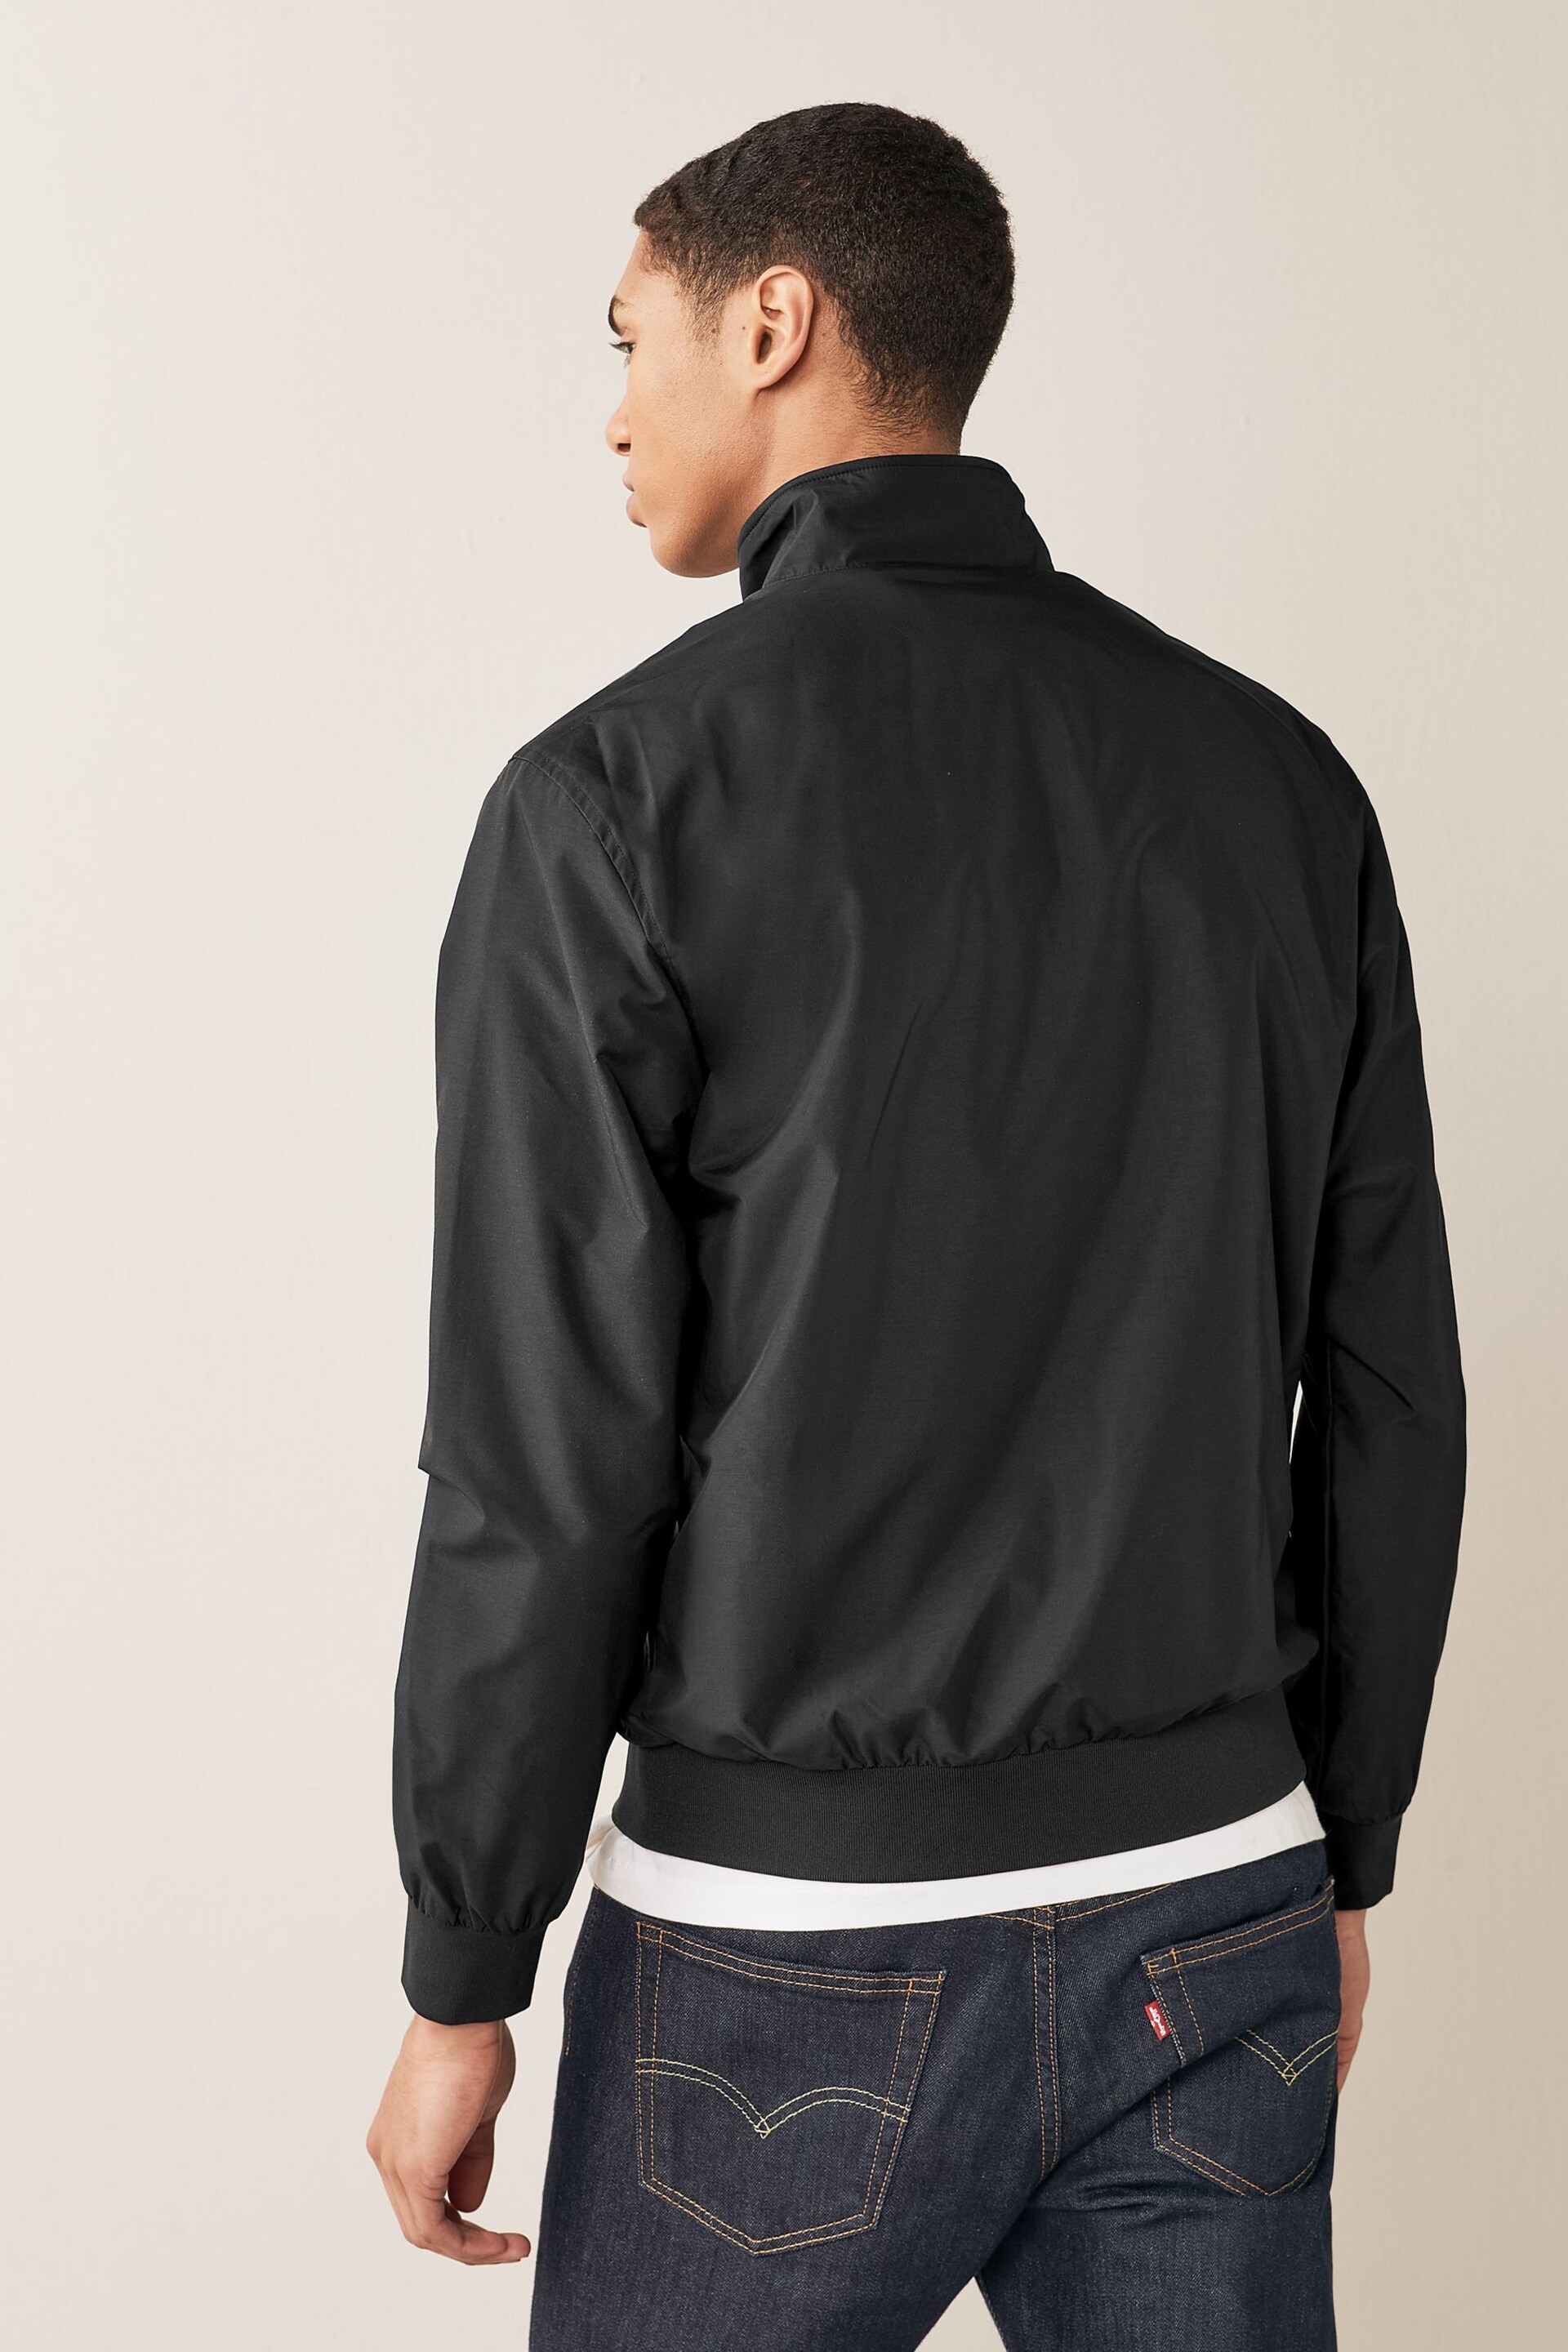 Fred Perry Brentham Sports Jacket - Image 2 of 5